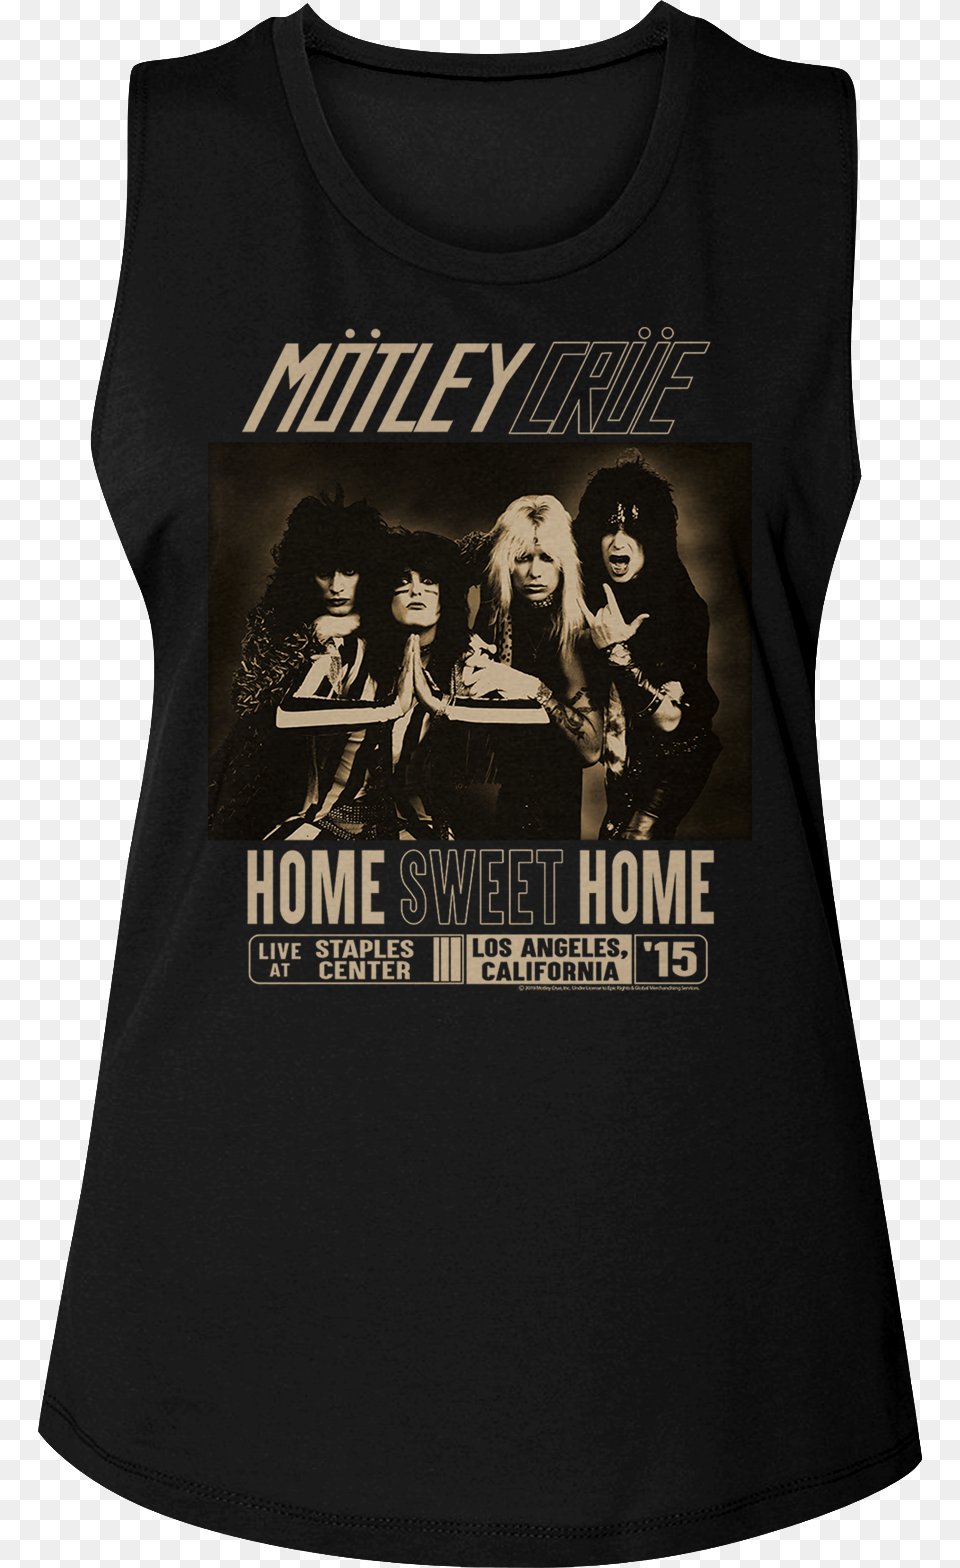 Ladies Home Sweet Home Motley Crue Muscle Tank Top T Shirt Home Sweet Home Motley Crue, Clothing, T-shirt, Adult, Wedding Png Image